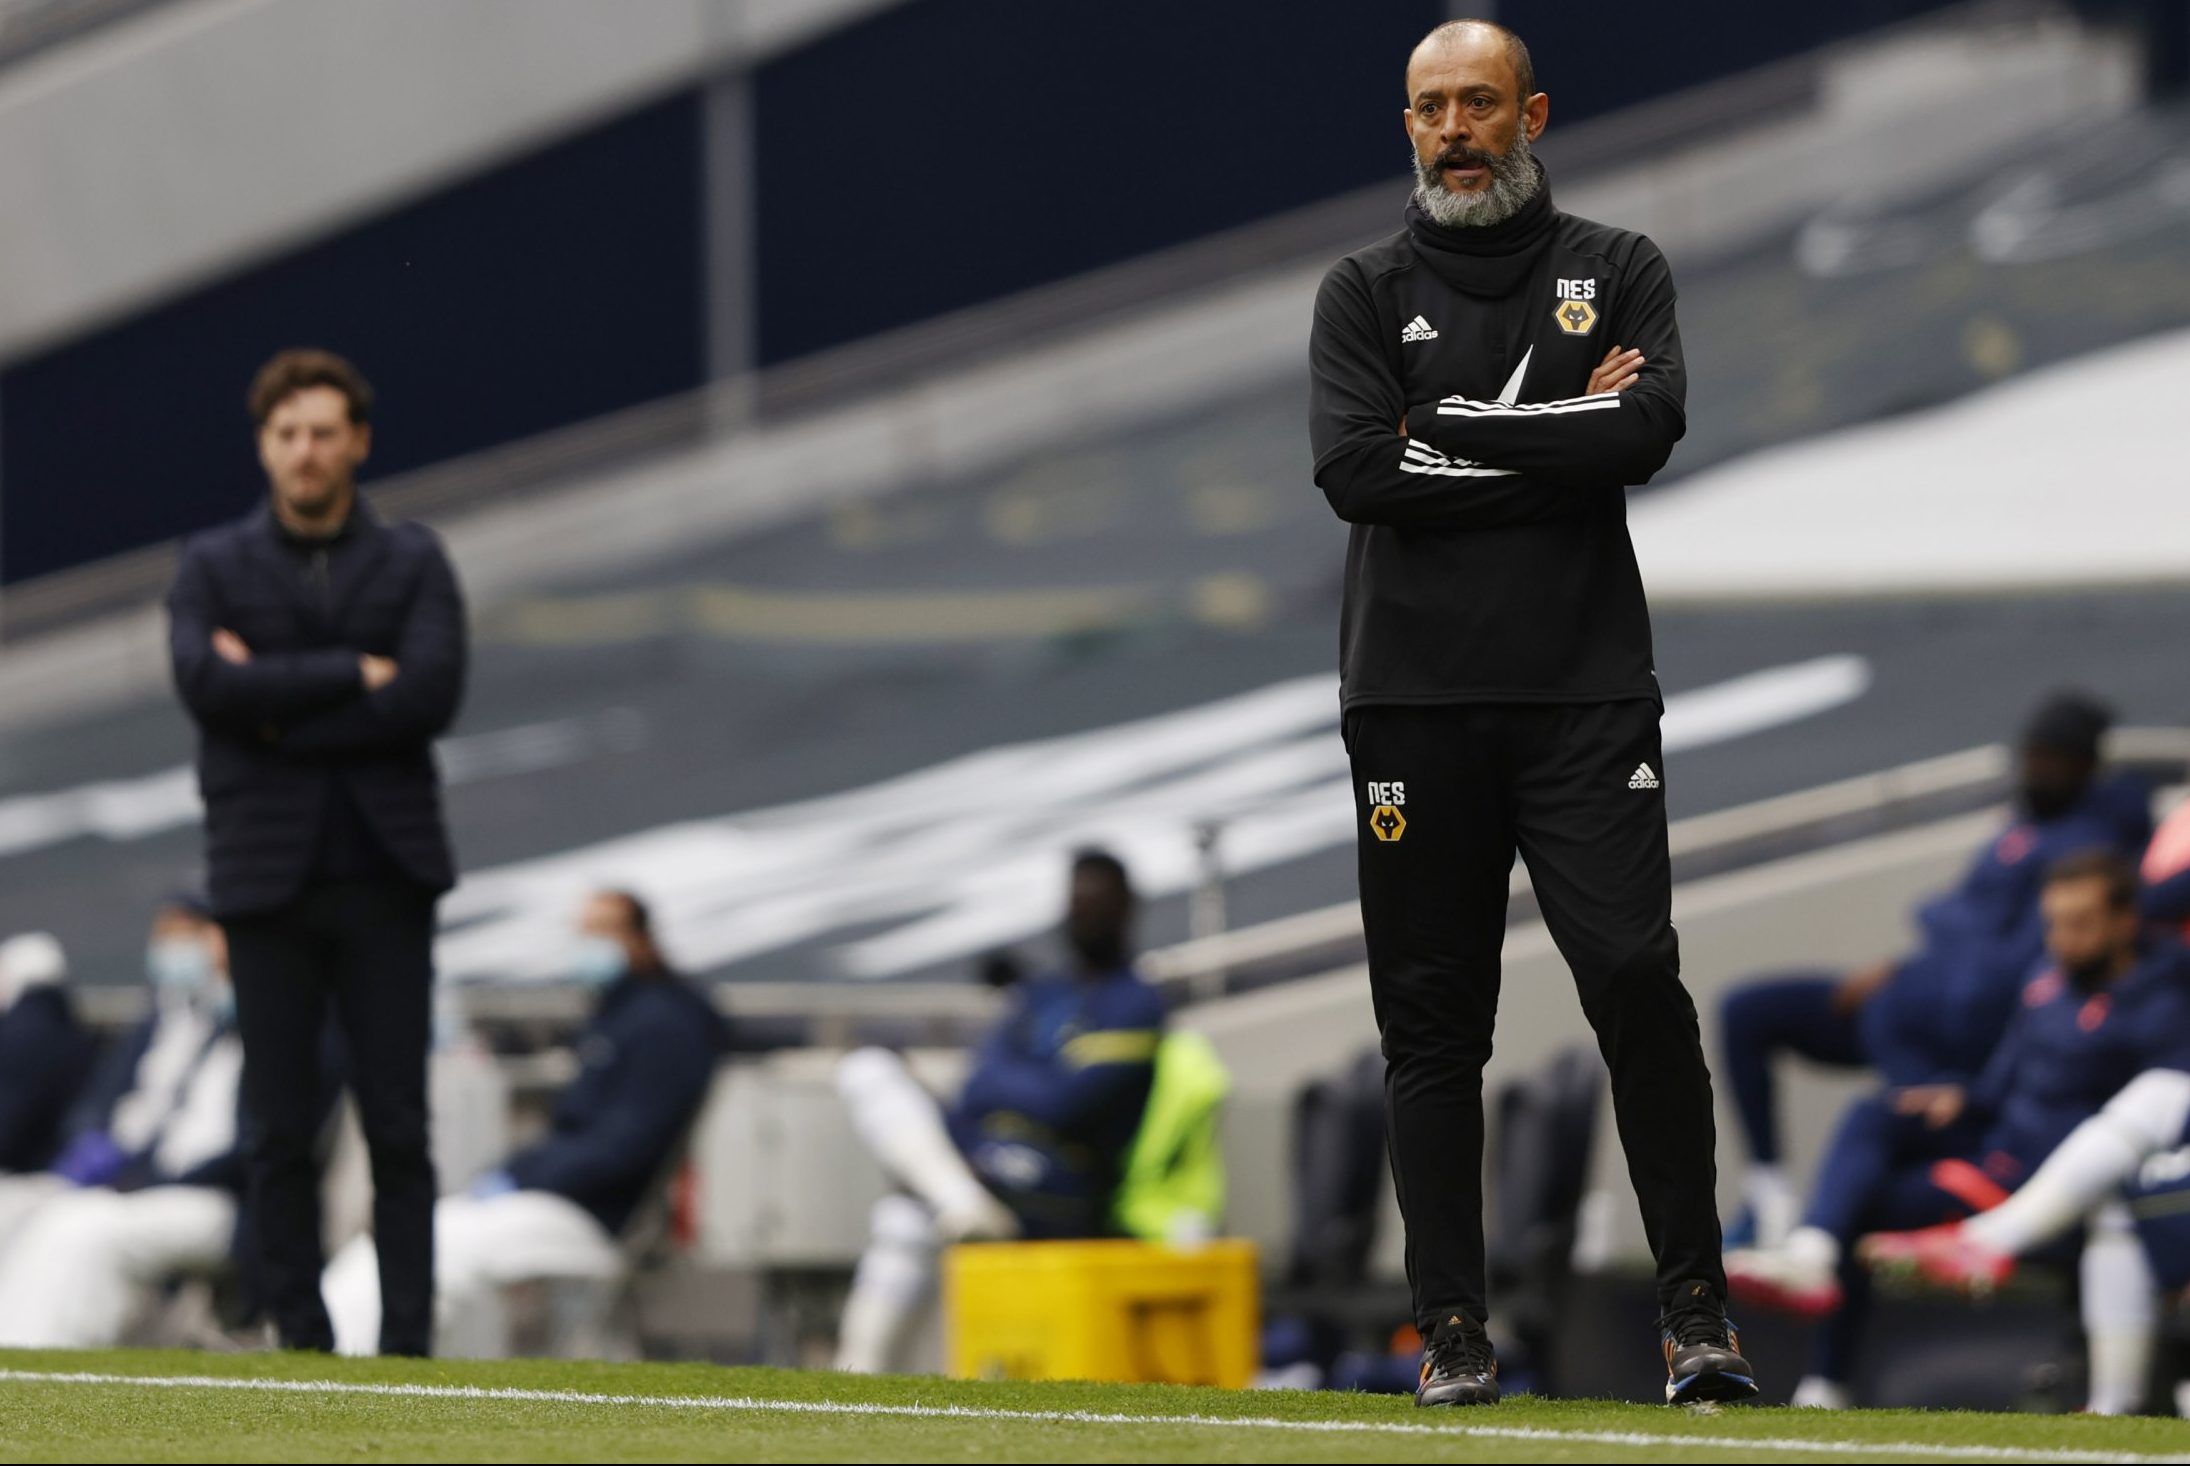 wolves manager nuno santo on sideline against spurs in the premier league